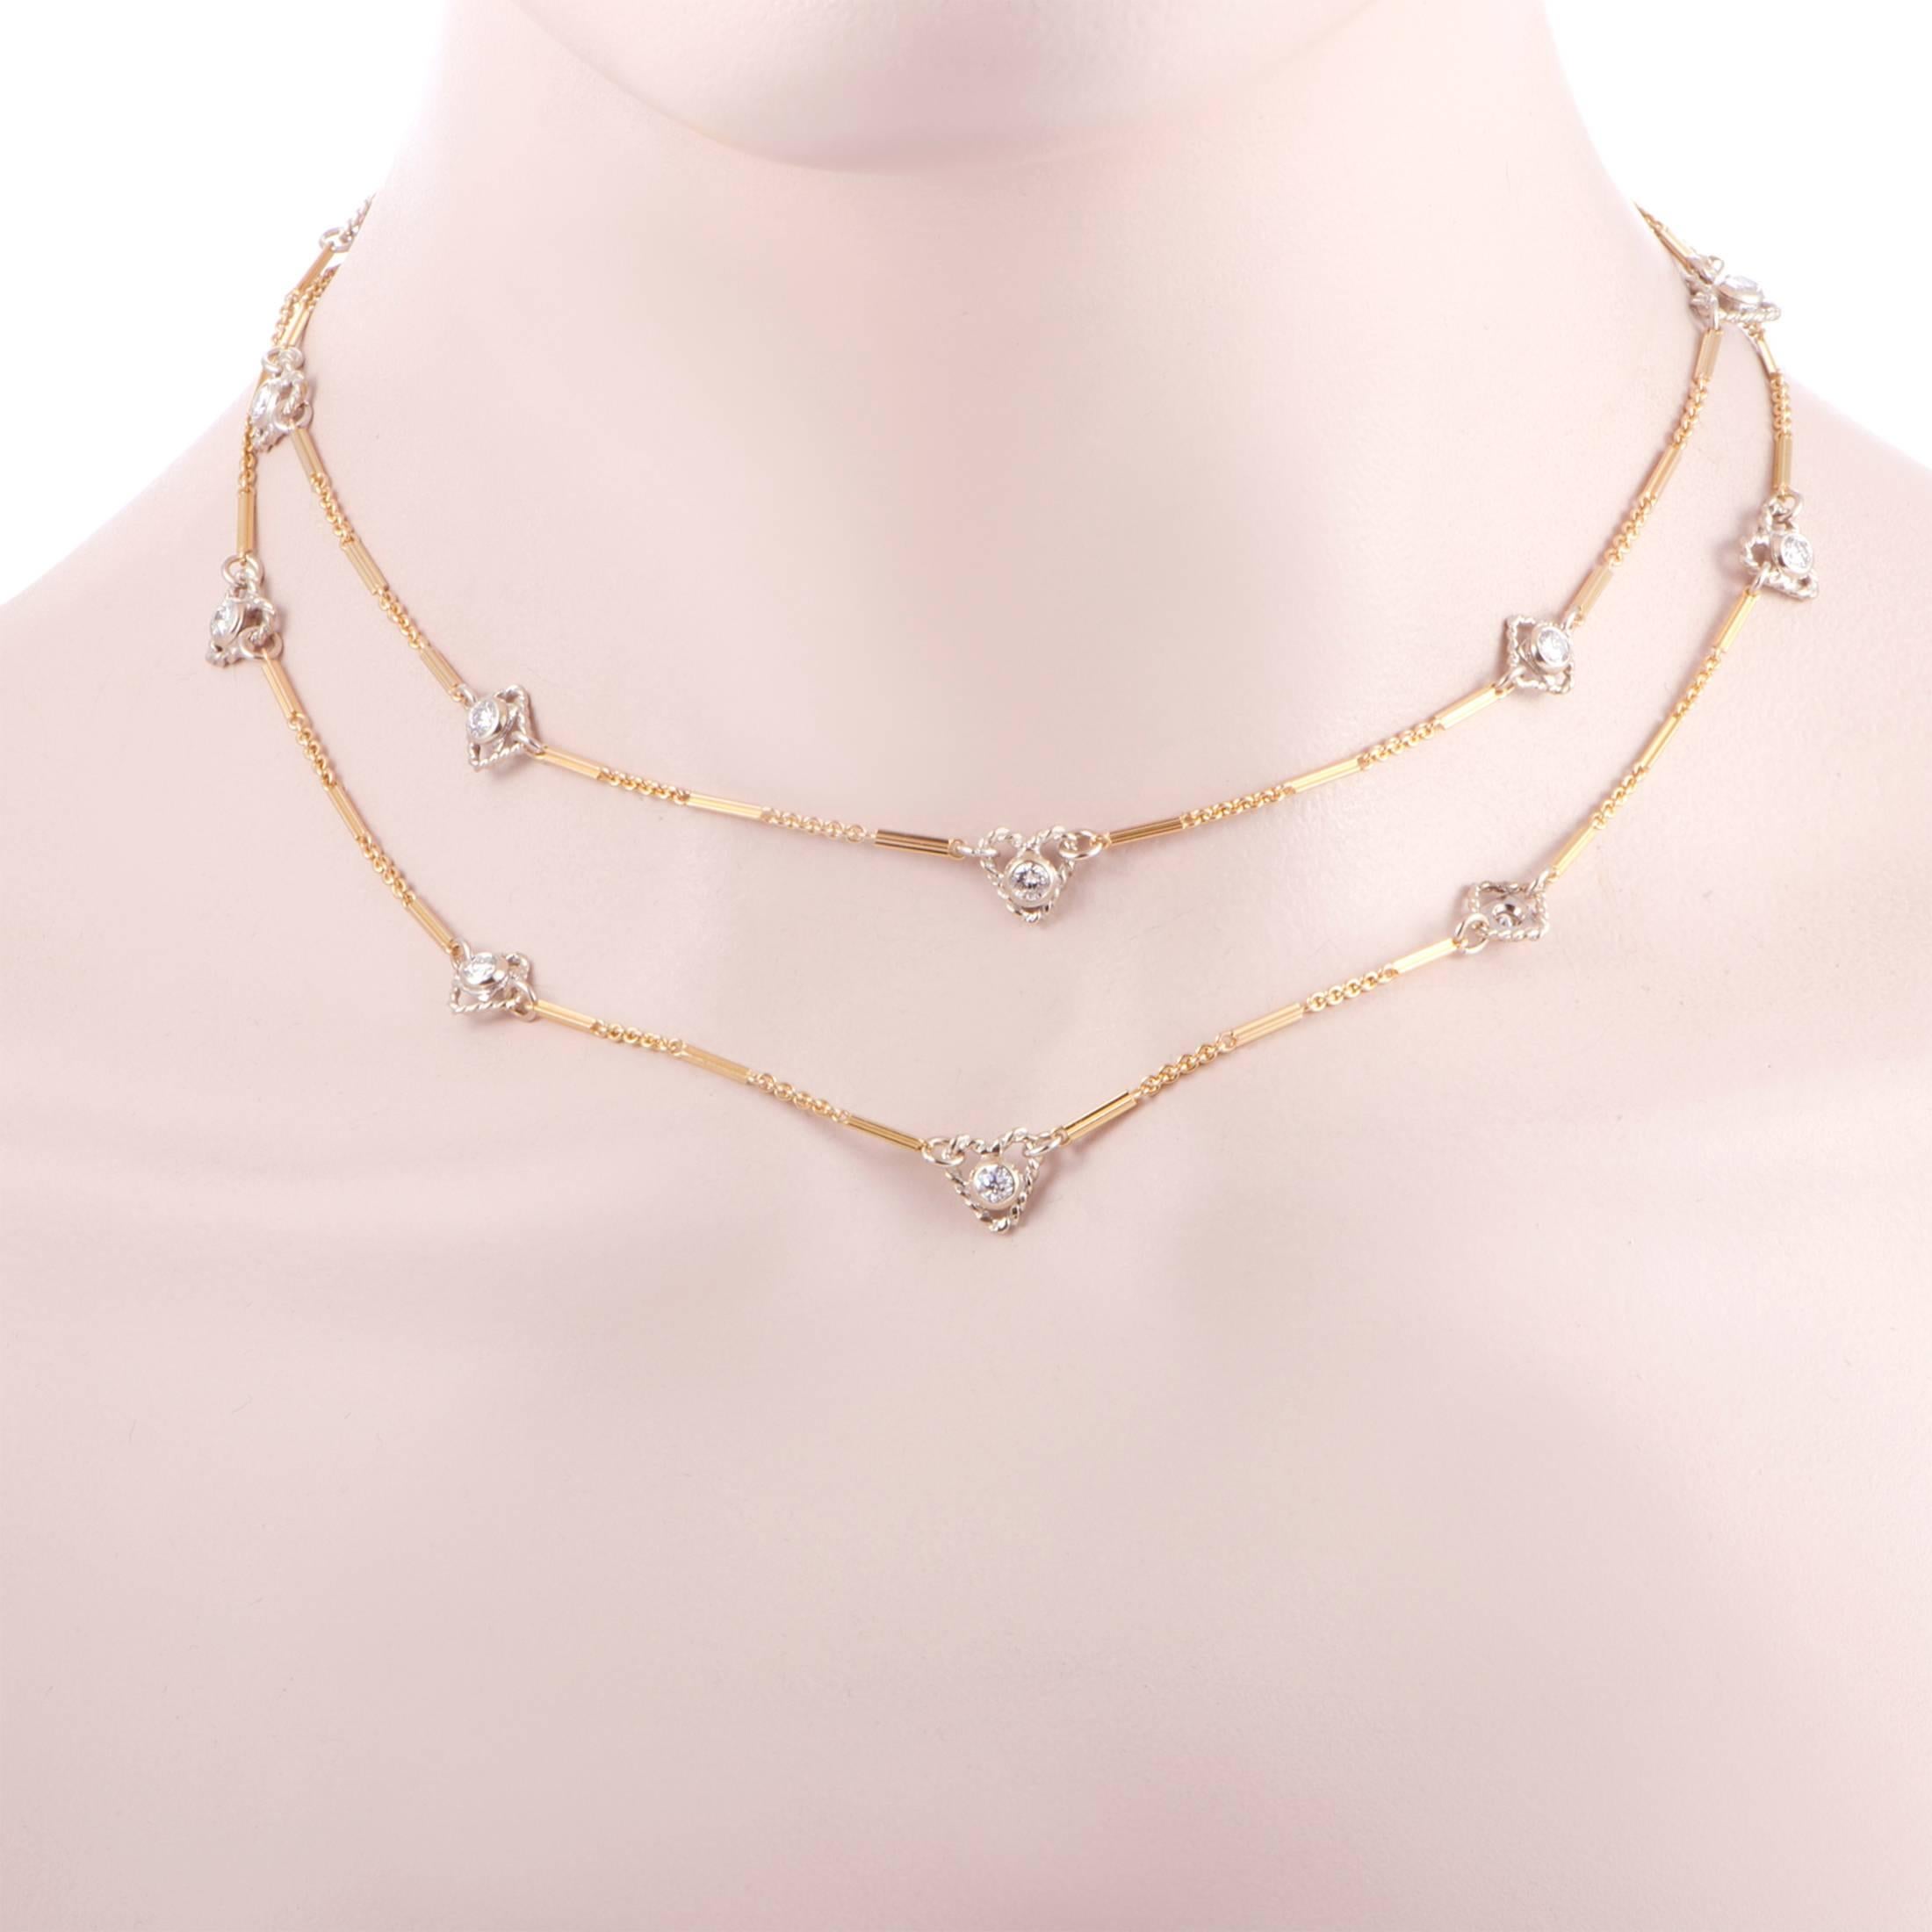 Simple and captivating at the same time, this necklace embodies the essence of luxurious elegance and classy prestige. Made of 14K yellow and white gold, its luxurious appeal is enhanced by the 2.20 carats of sparkly diamonds set along the chain.